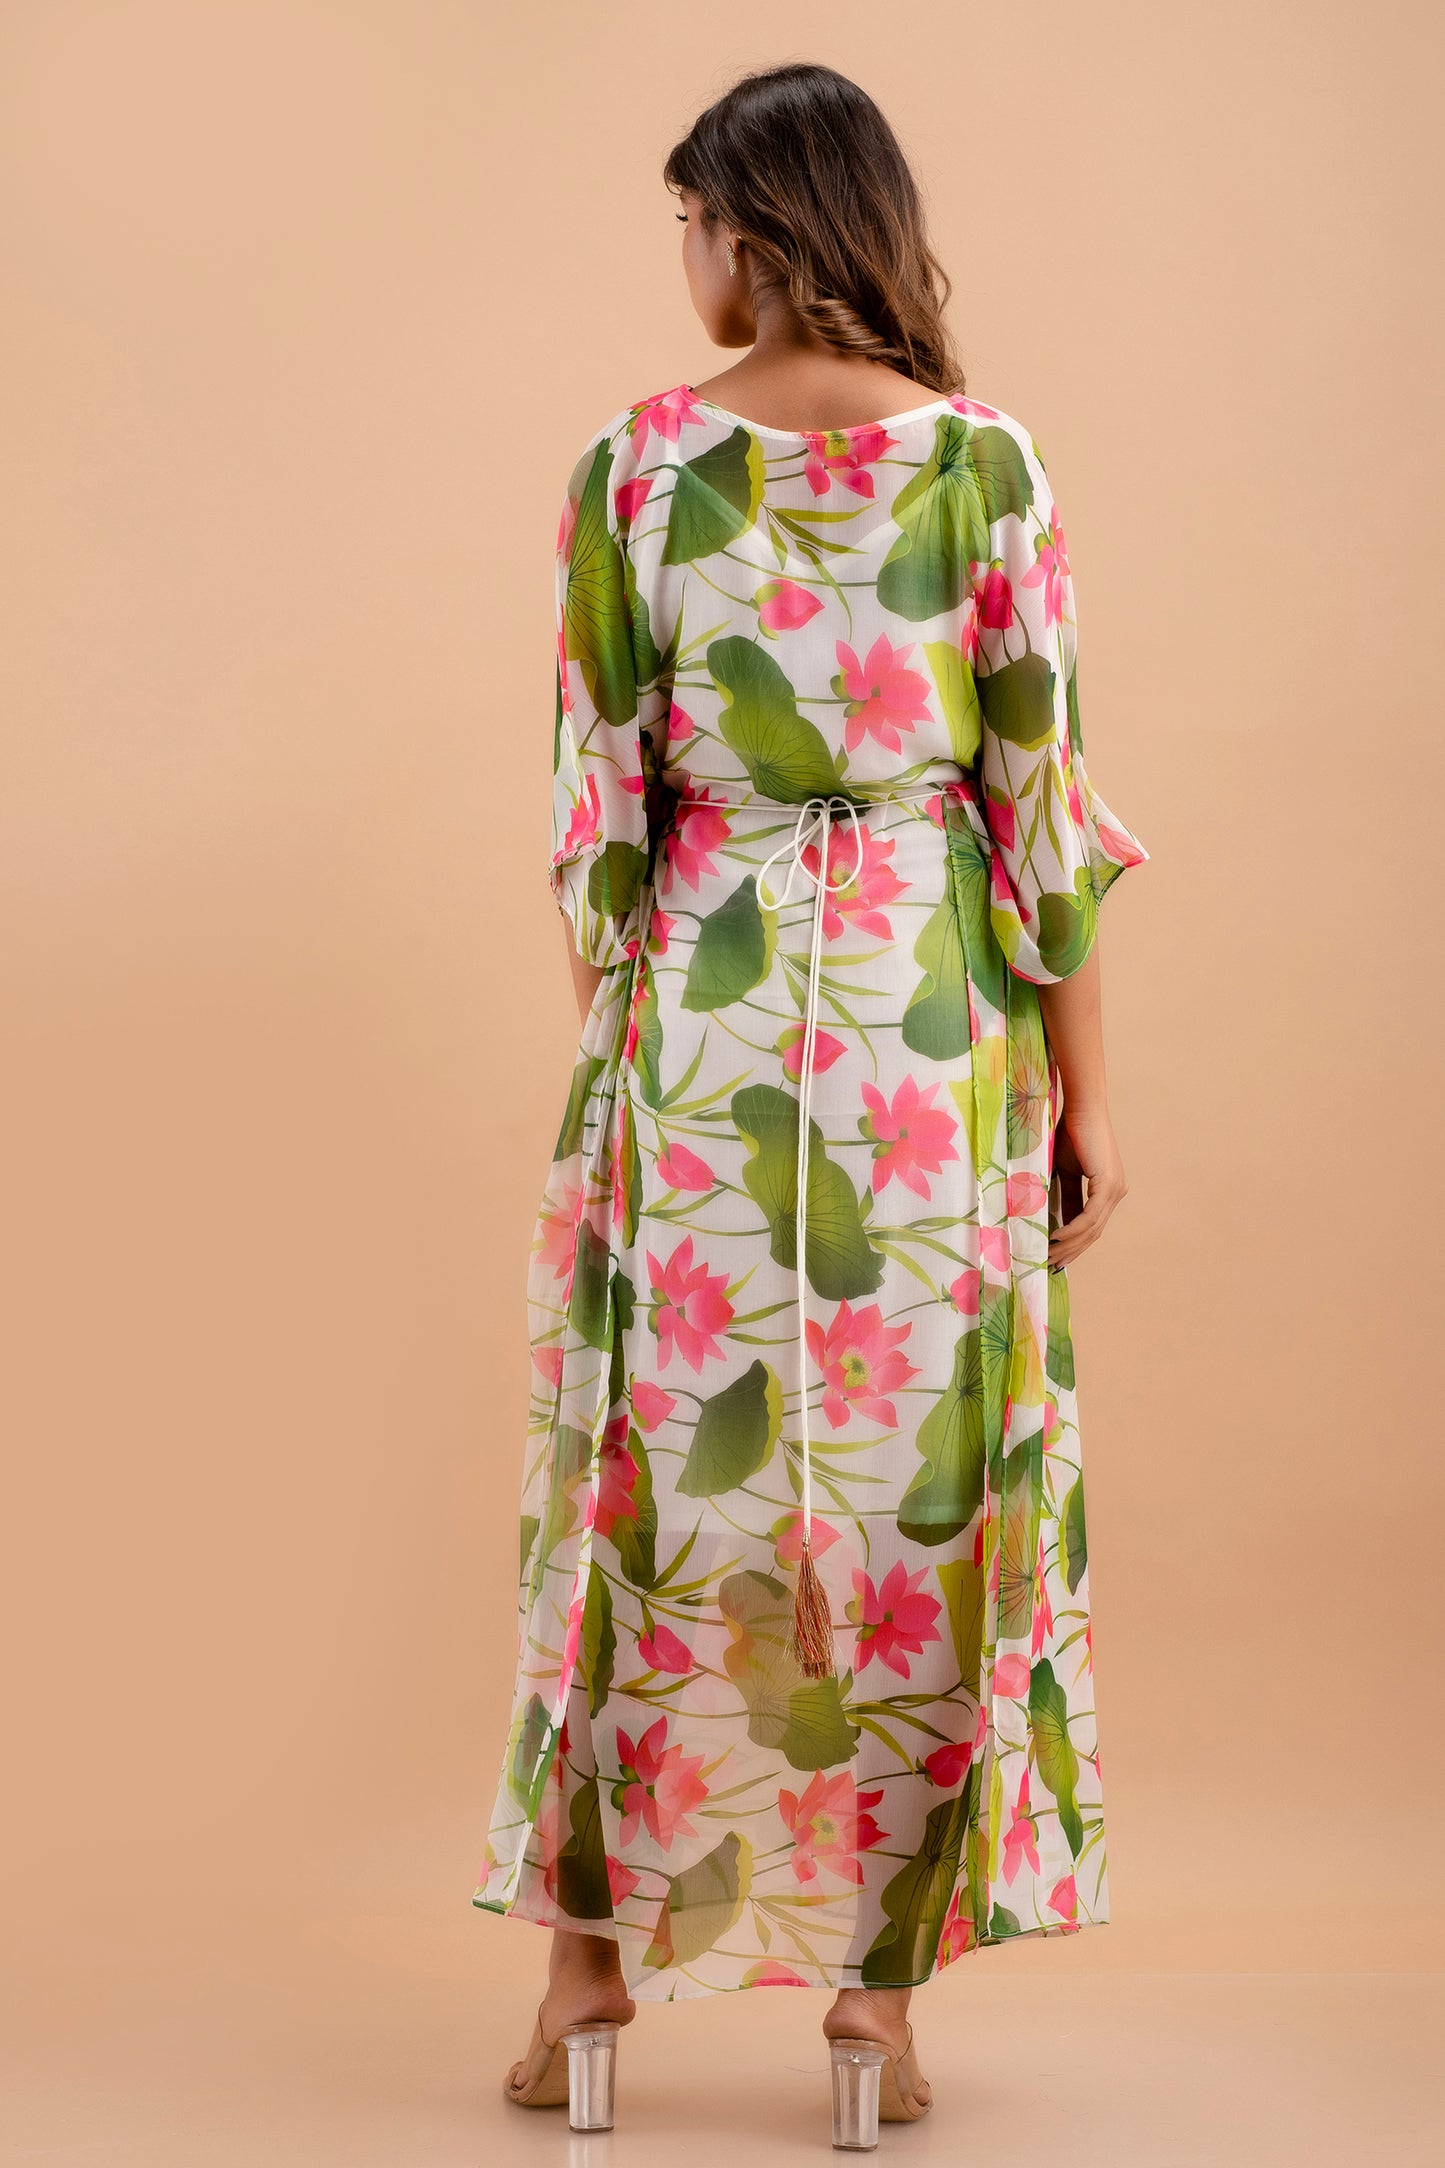 Printed kaftans with slips